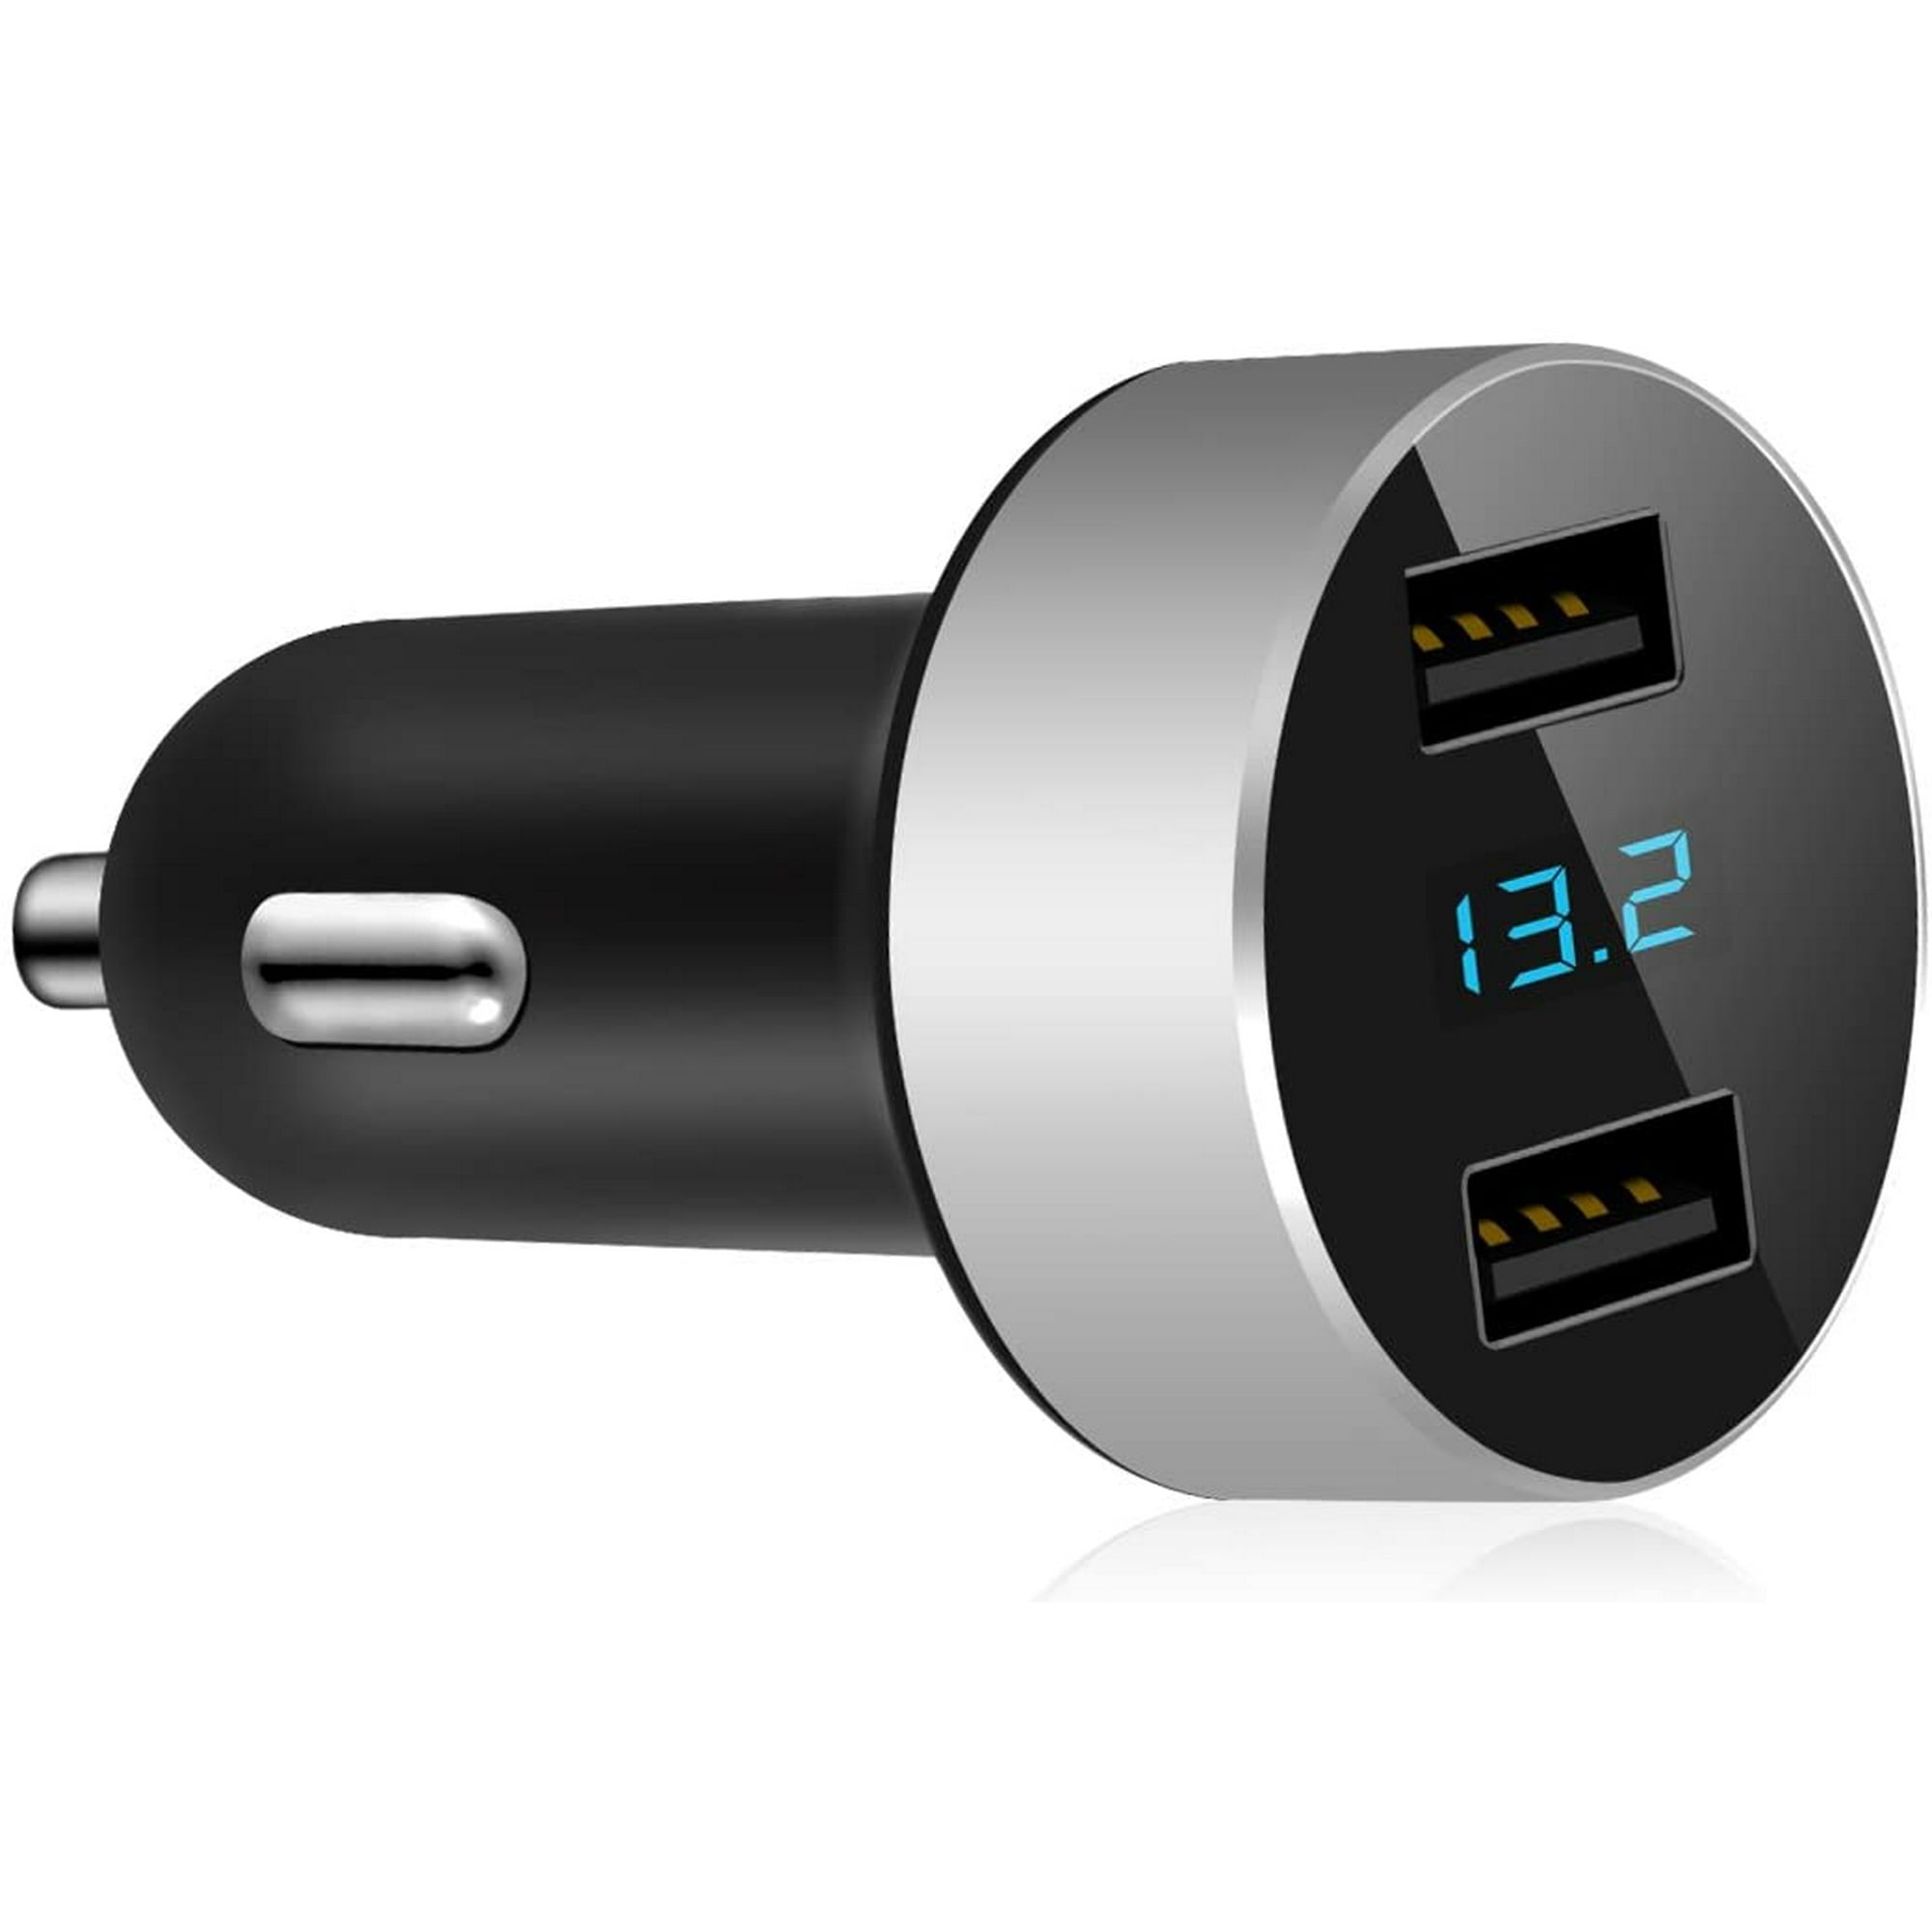 Dual USB Car Charger, Output,Cigarette Lighter Voltage Meter Compatible  with Apple iPhone,iPad,Samsung Galaxy ,LG ,Google Nexus,USB Charging  Devices,Silver | Walmart Canada